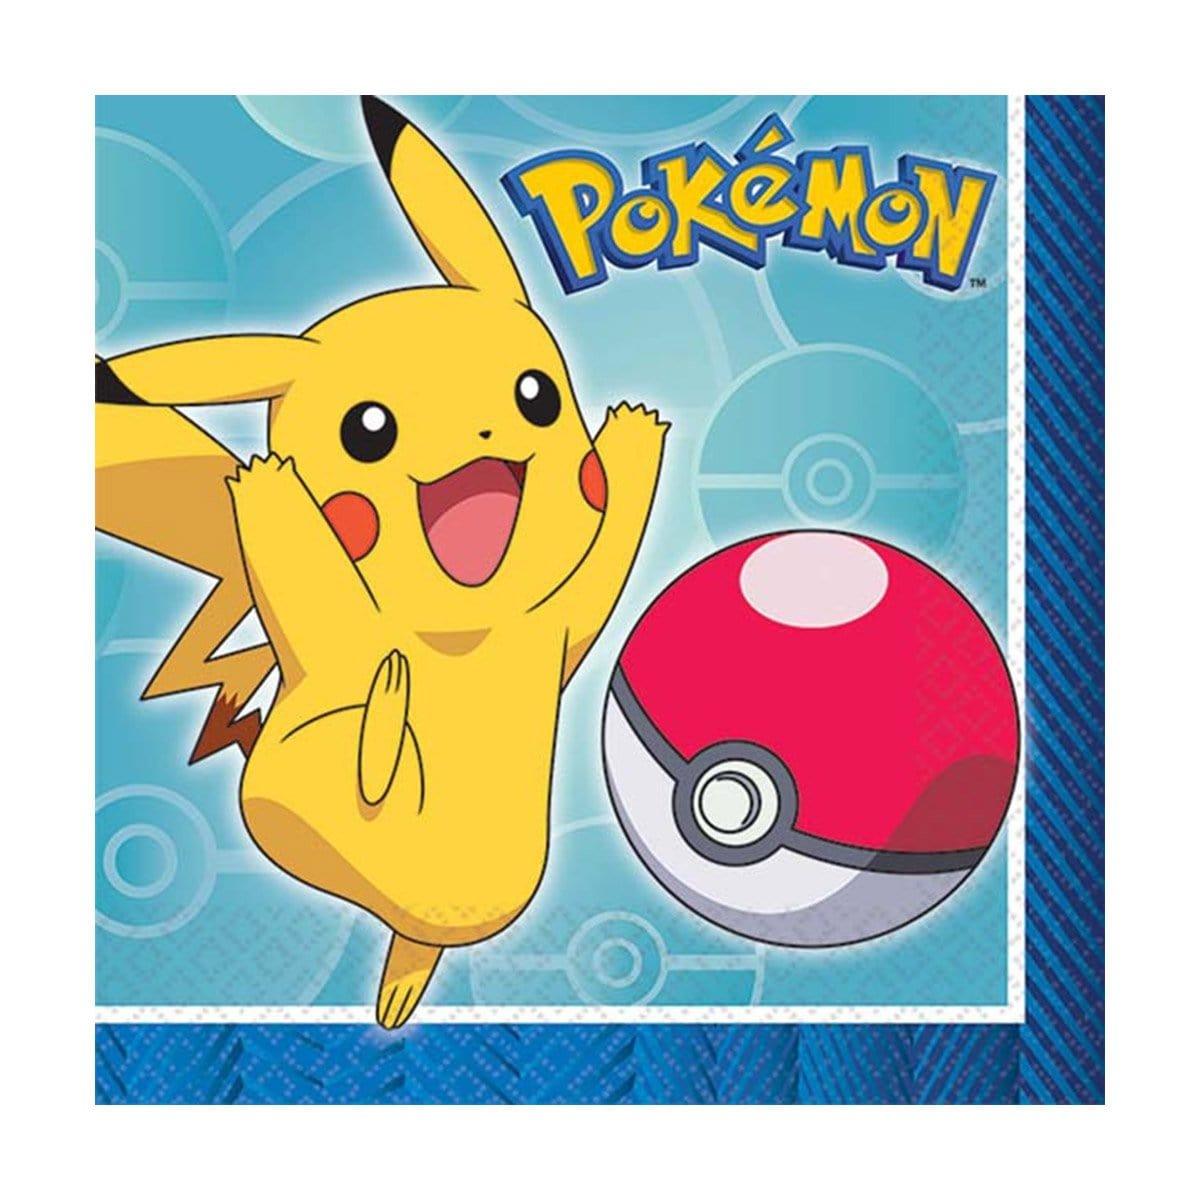 Buy Kids Birthday Pokémon beverage napkins, 16 per package sold at Party Expert